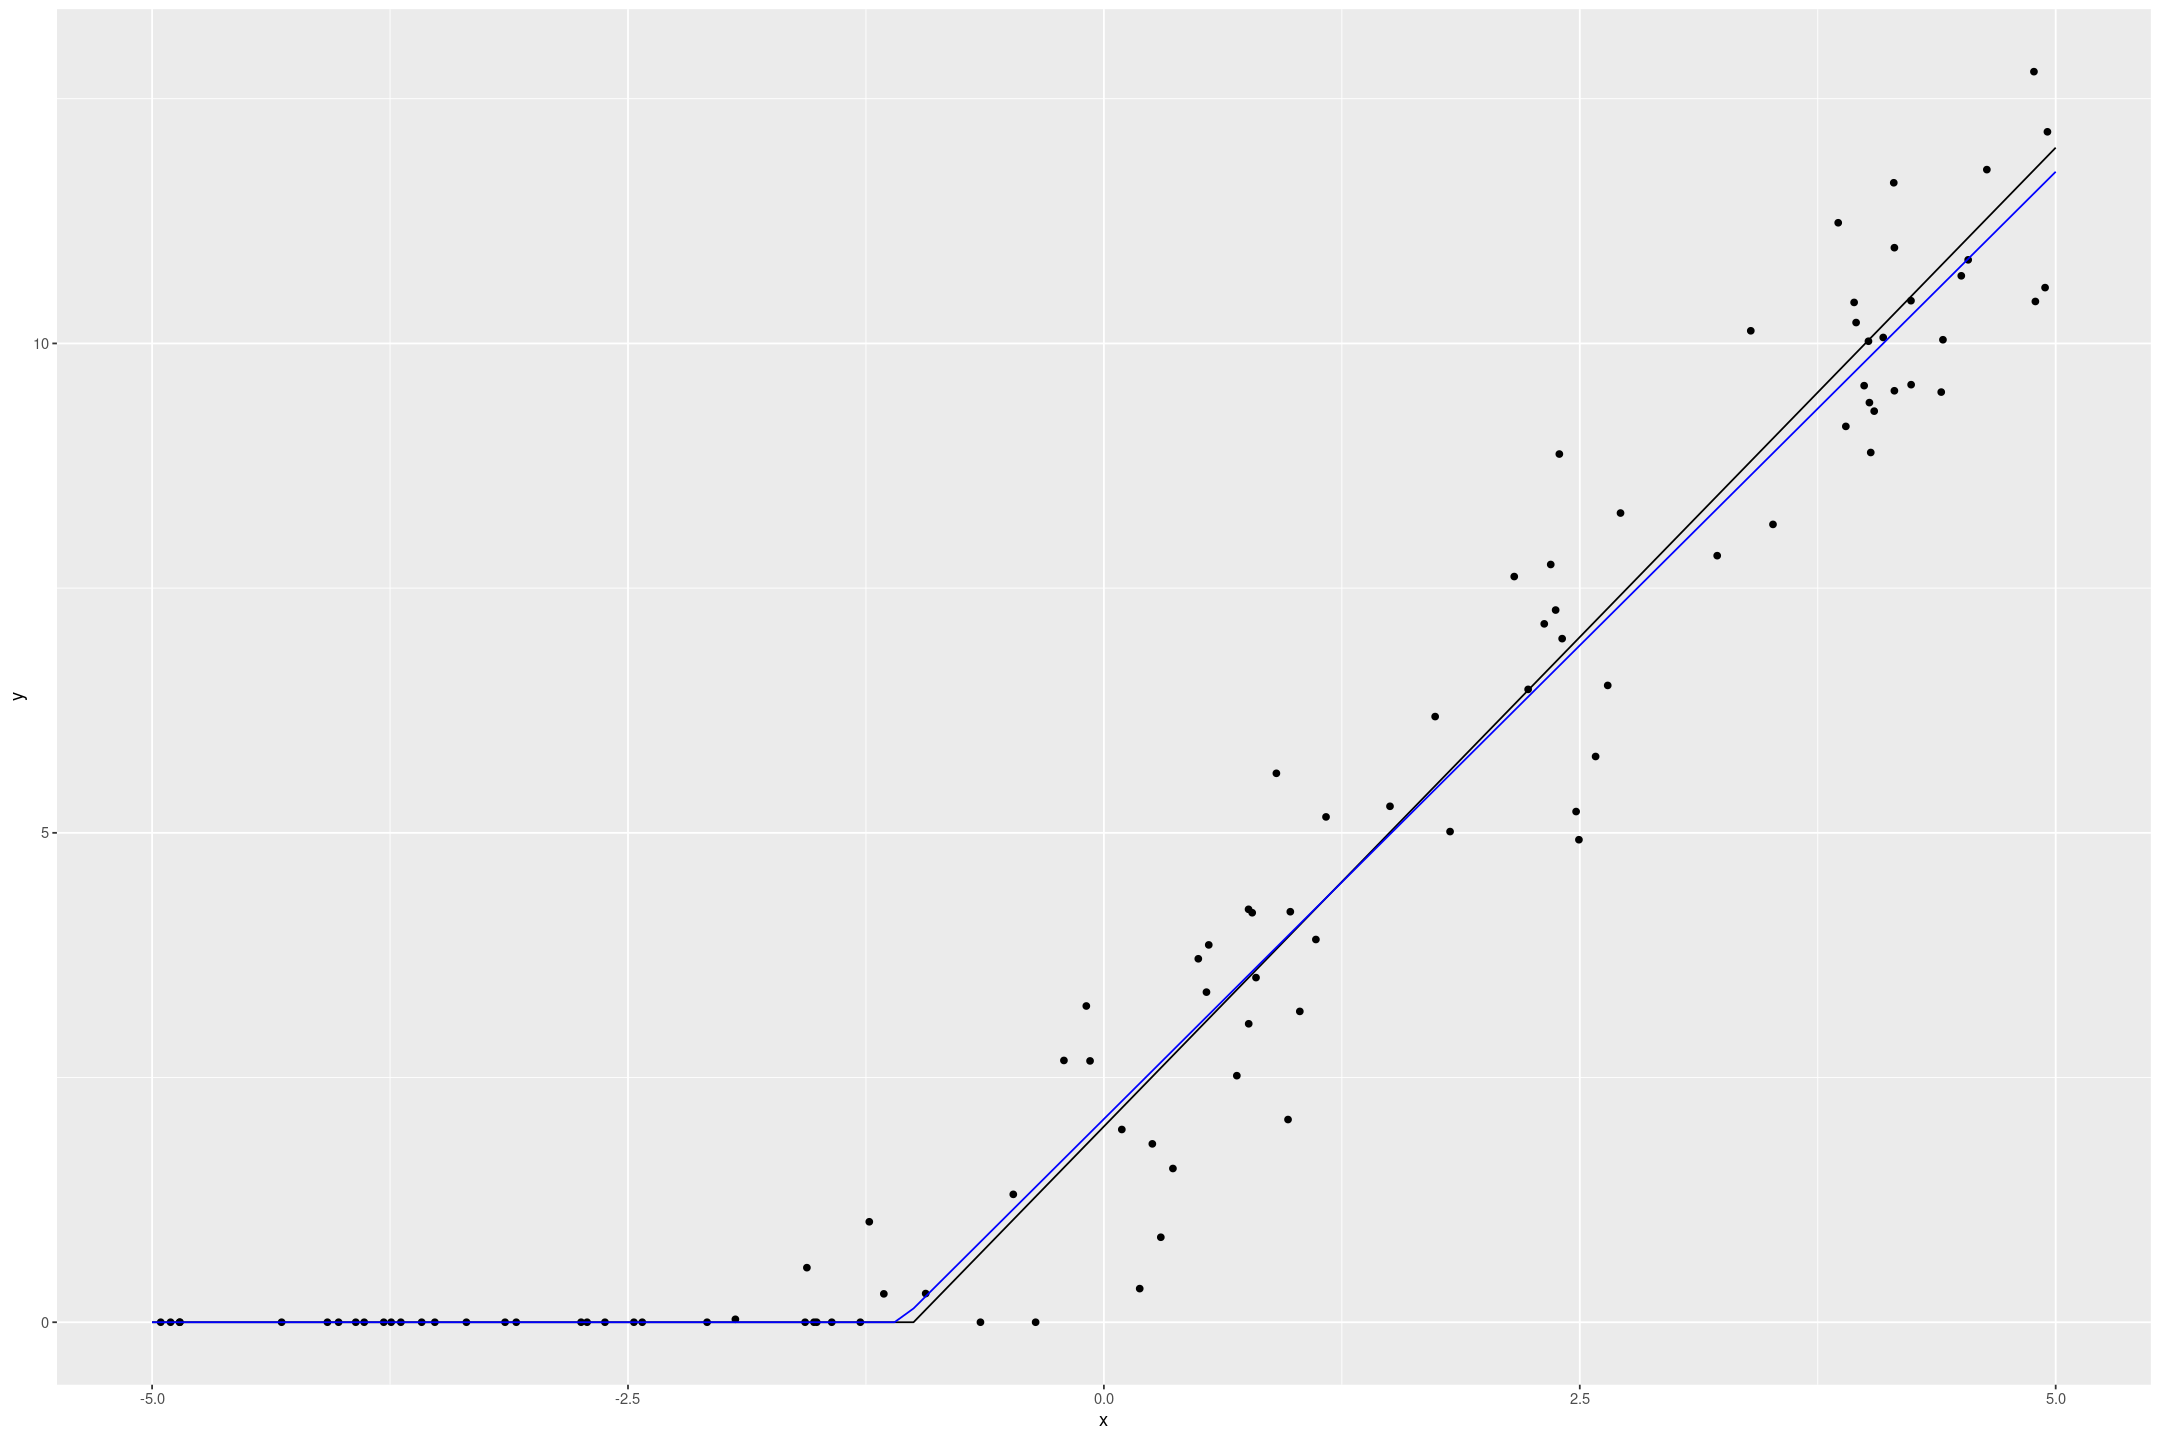 Tobit Regression in Stan and R